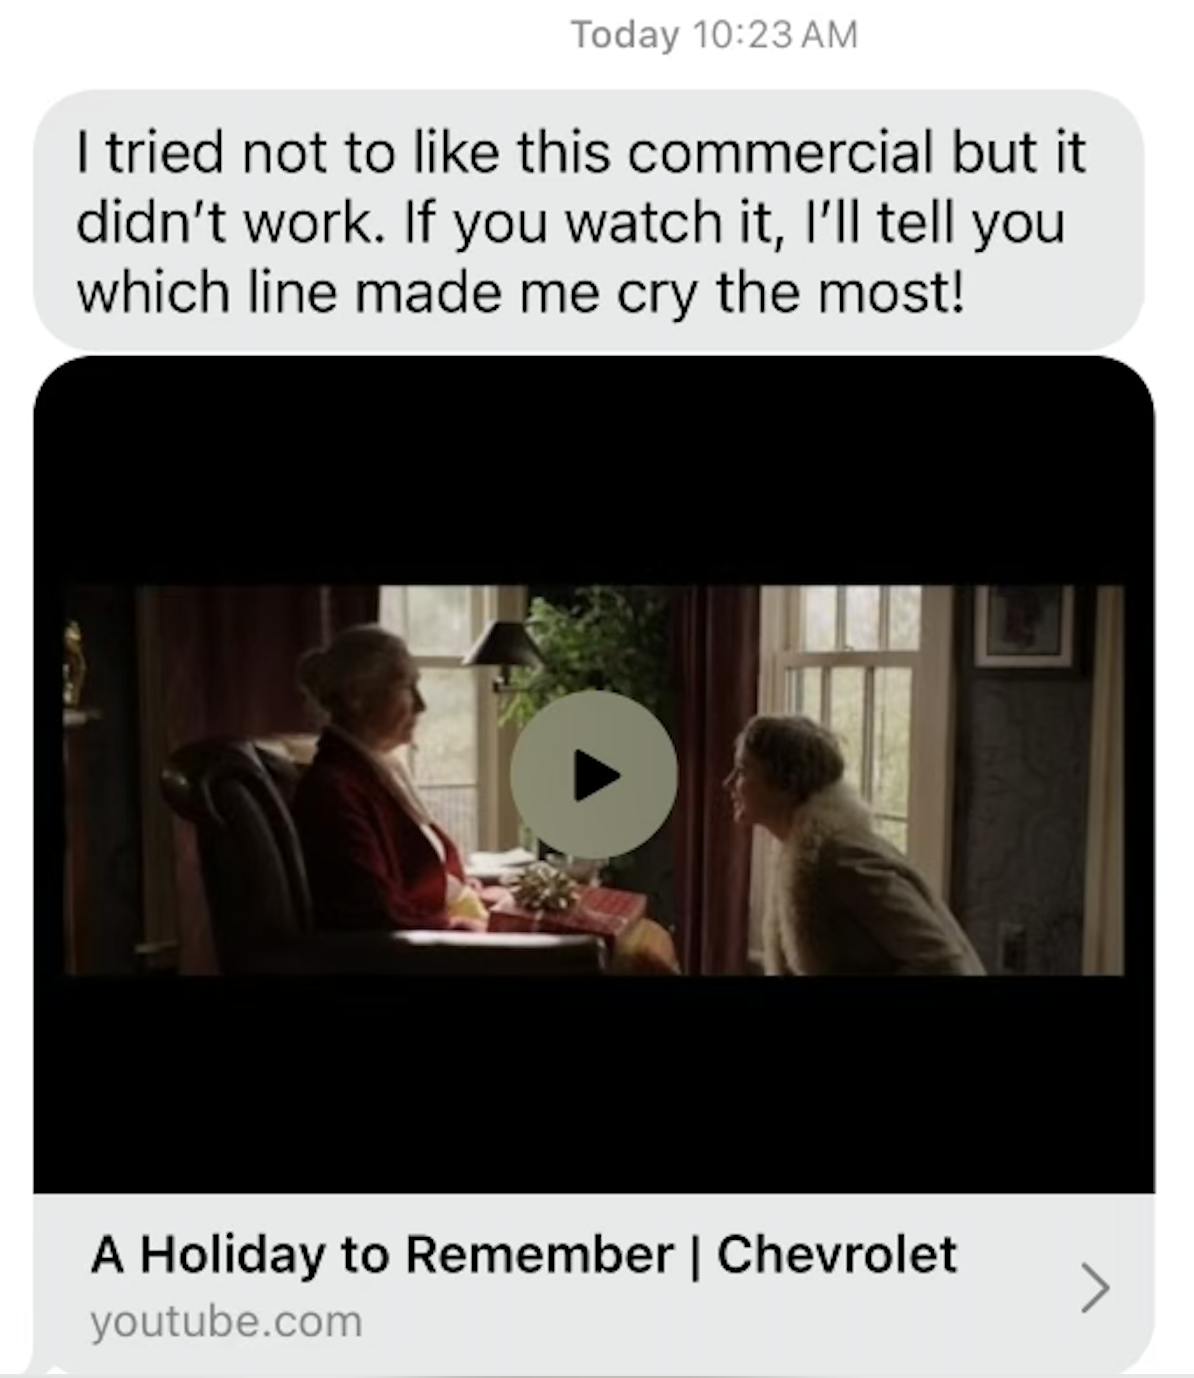 a screenshot of a text message showing a preview of a commercial and the words: "I tried not to like this commercial but it didn’t work. If you watch it, I’ll tell you which line made me cry the most!"